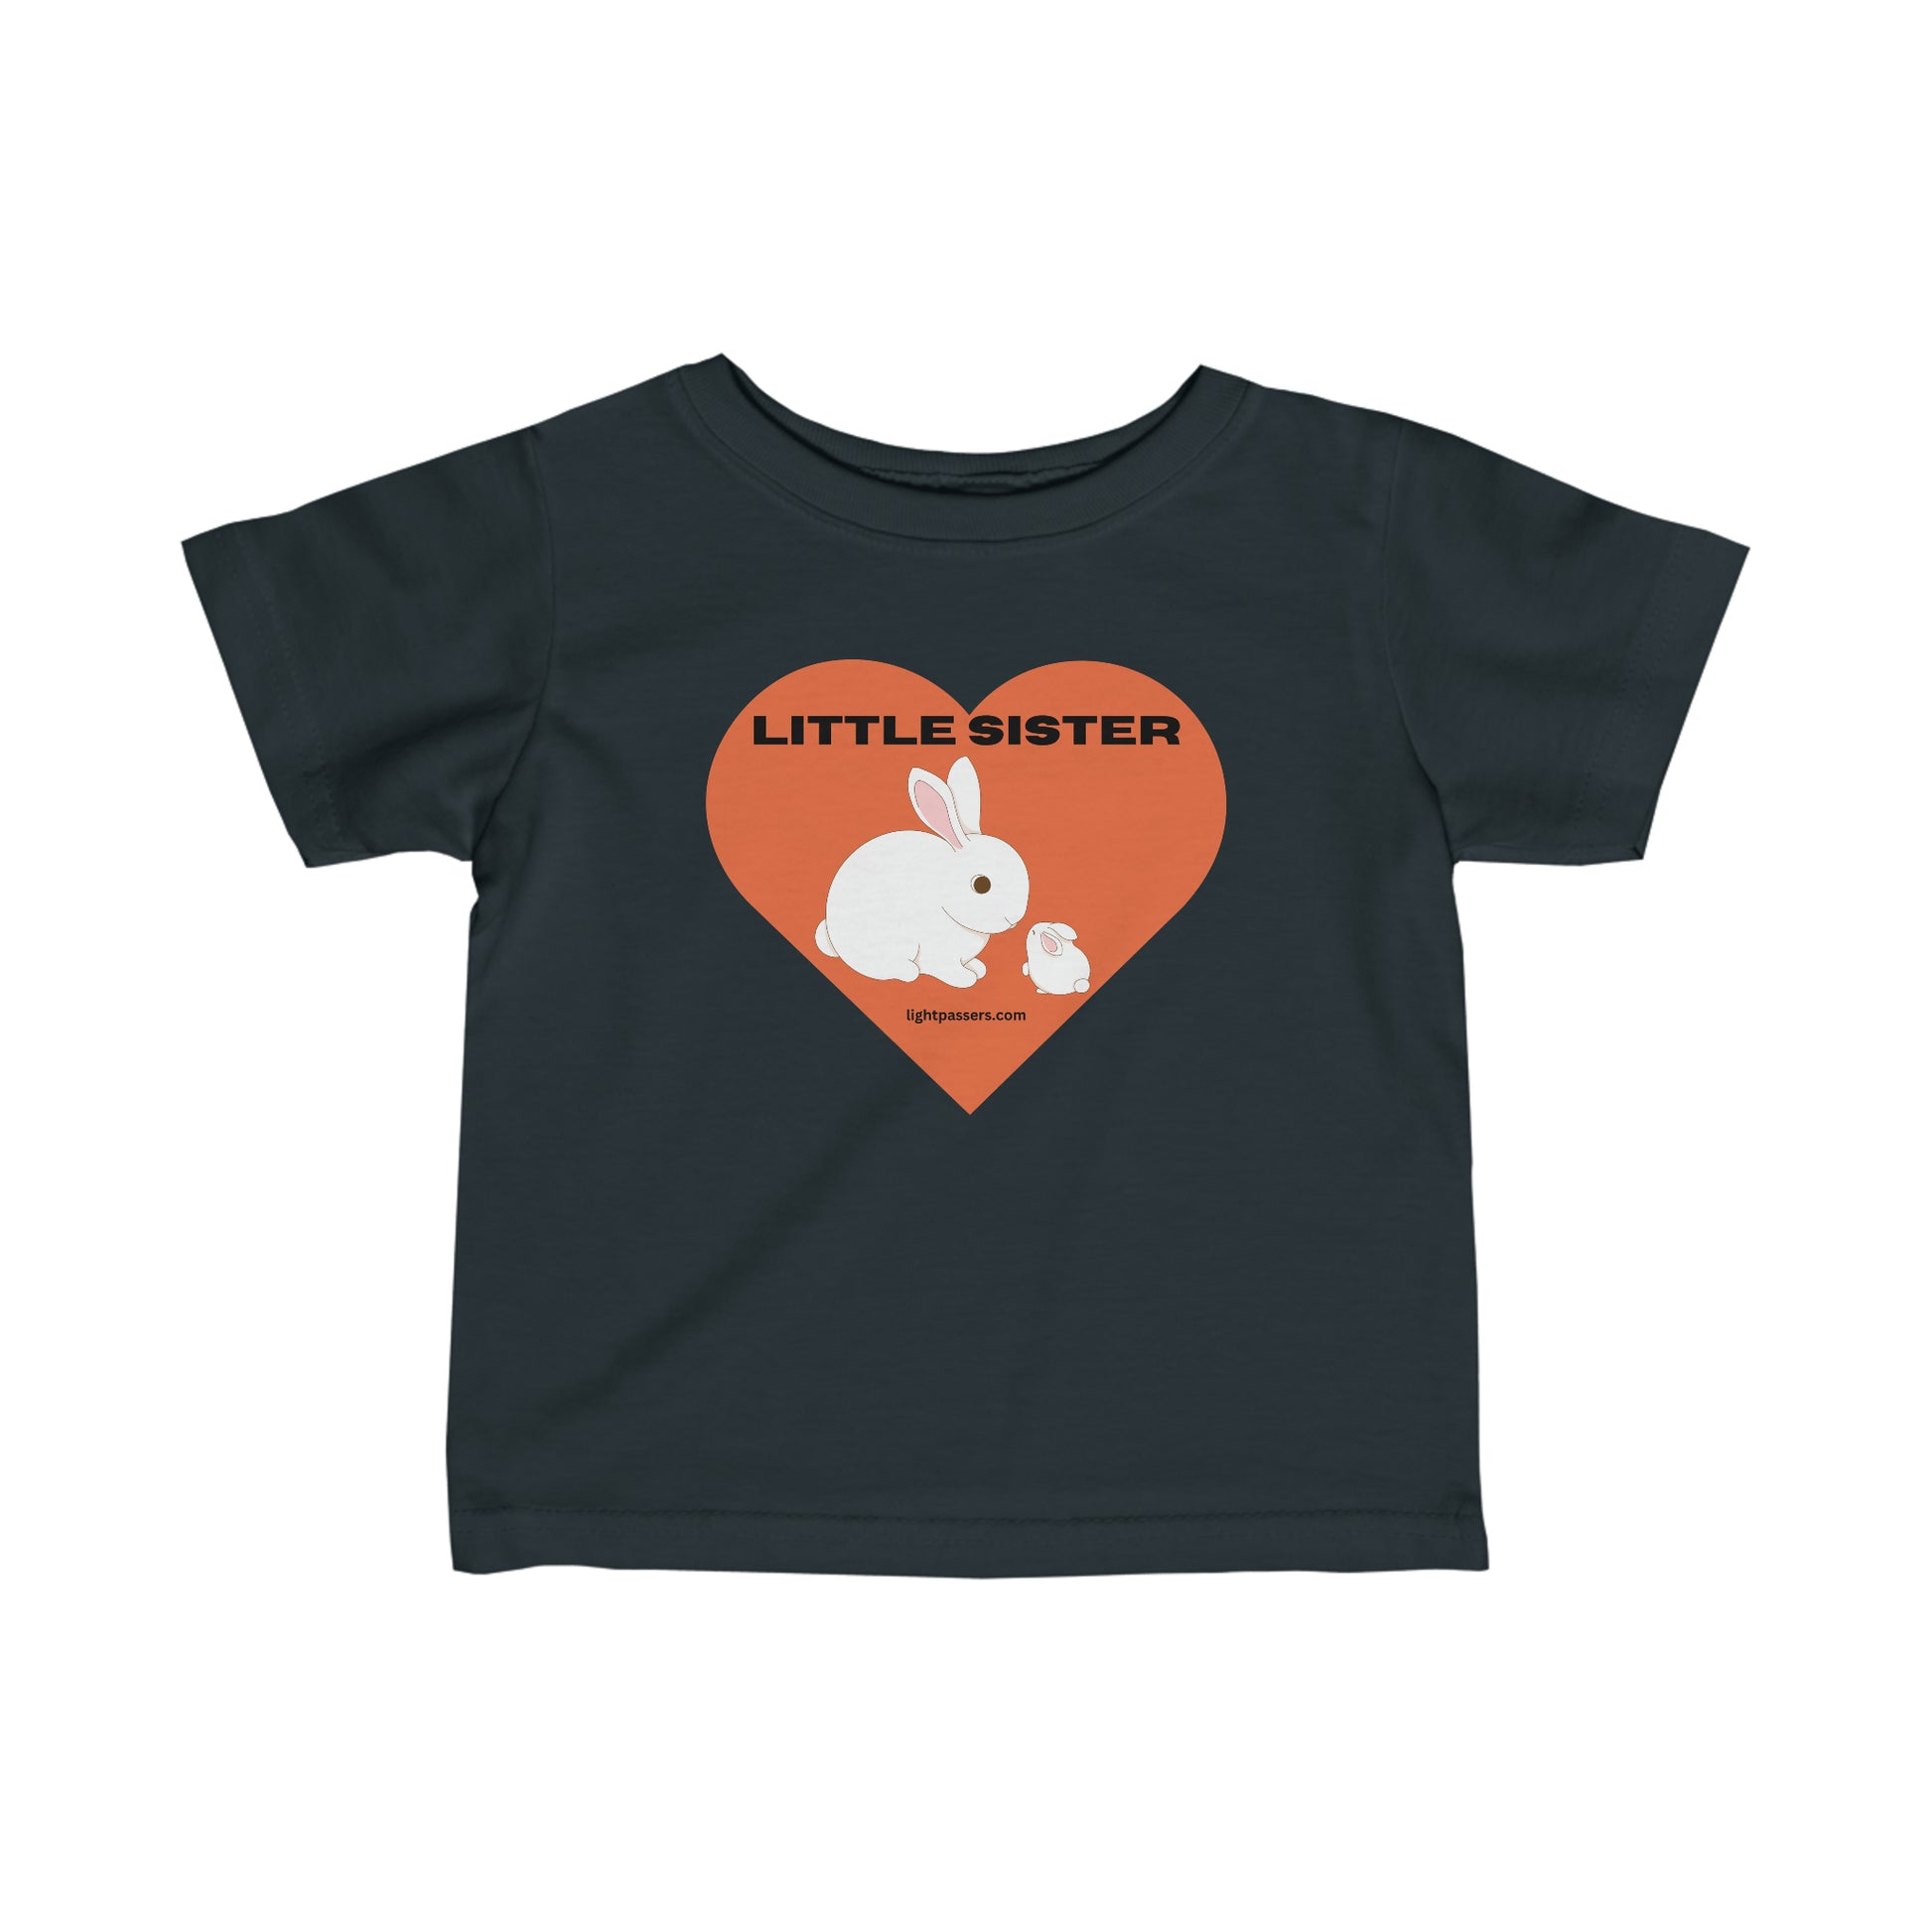 Infant fine jersey tee with a white rabbit and heart design, perfect for little sisters. Side seams, ribbed knitting, and taped shoulders for durability and comfort.